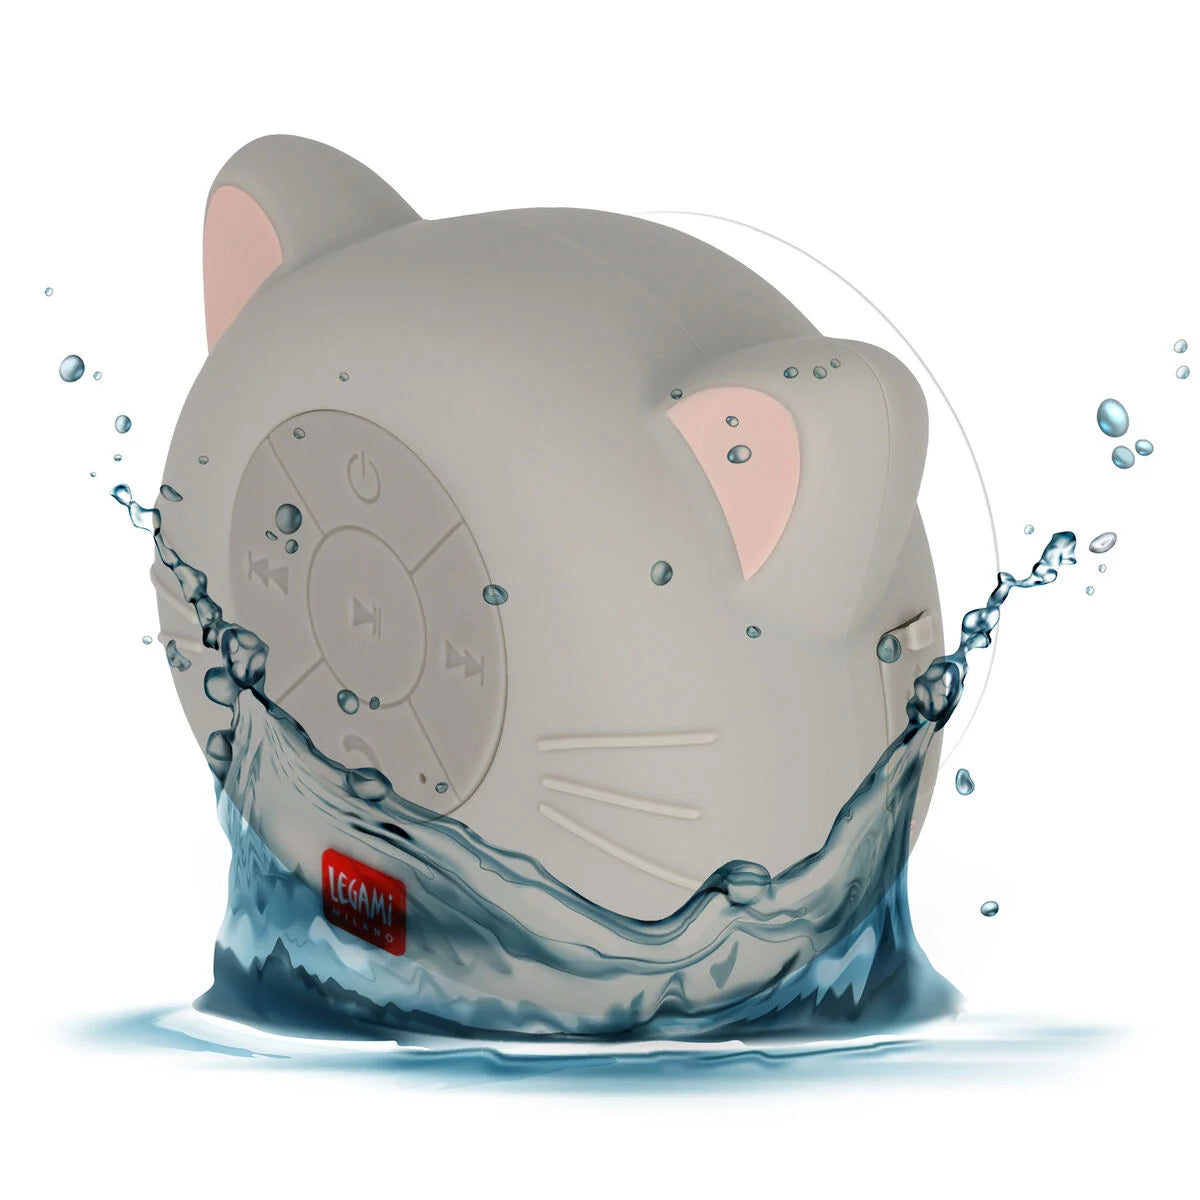 Fabulous Gifts Quirky Gifts Legami Singing In The Shower - Kitty by Weirs of Baggot Street